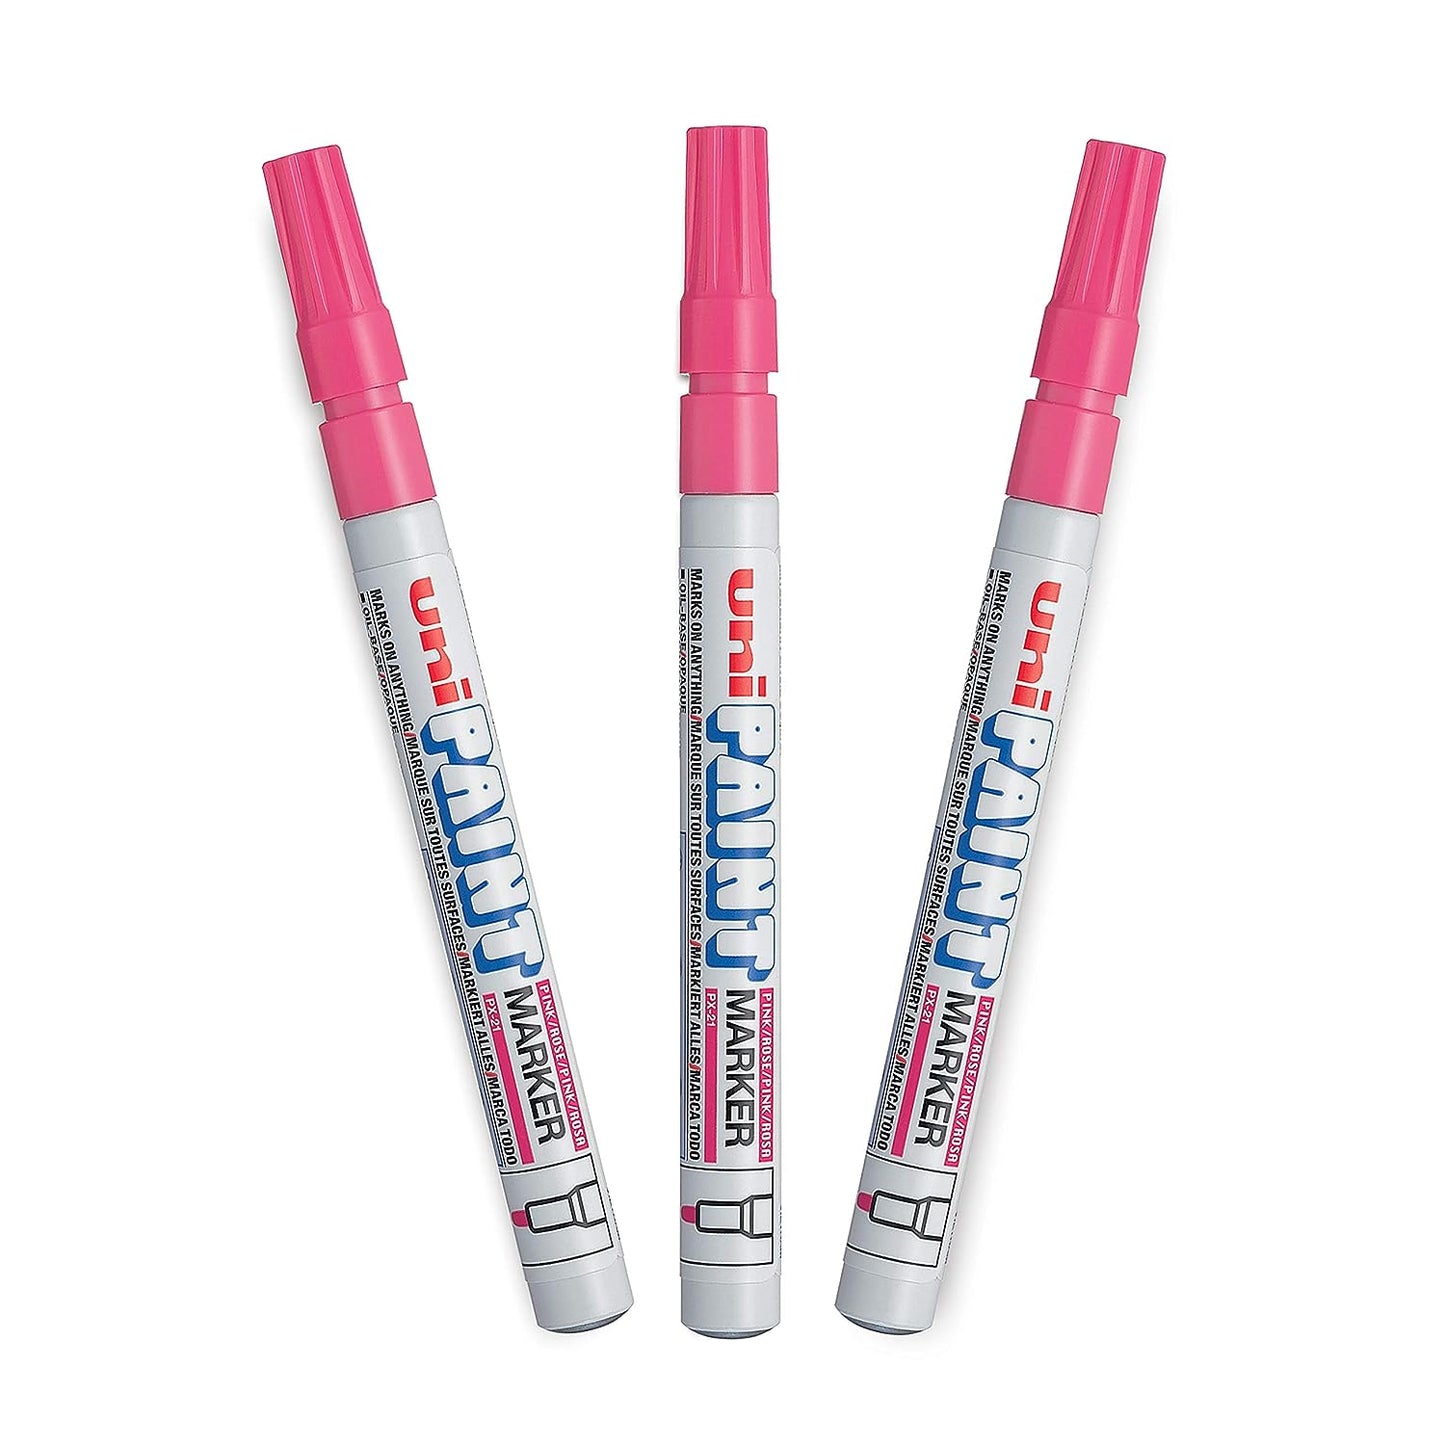 Uniball Px21 Paint Markers - Pink